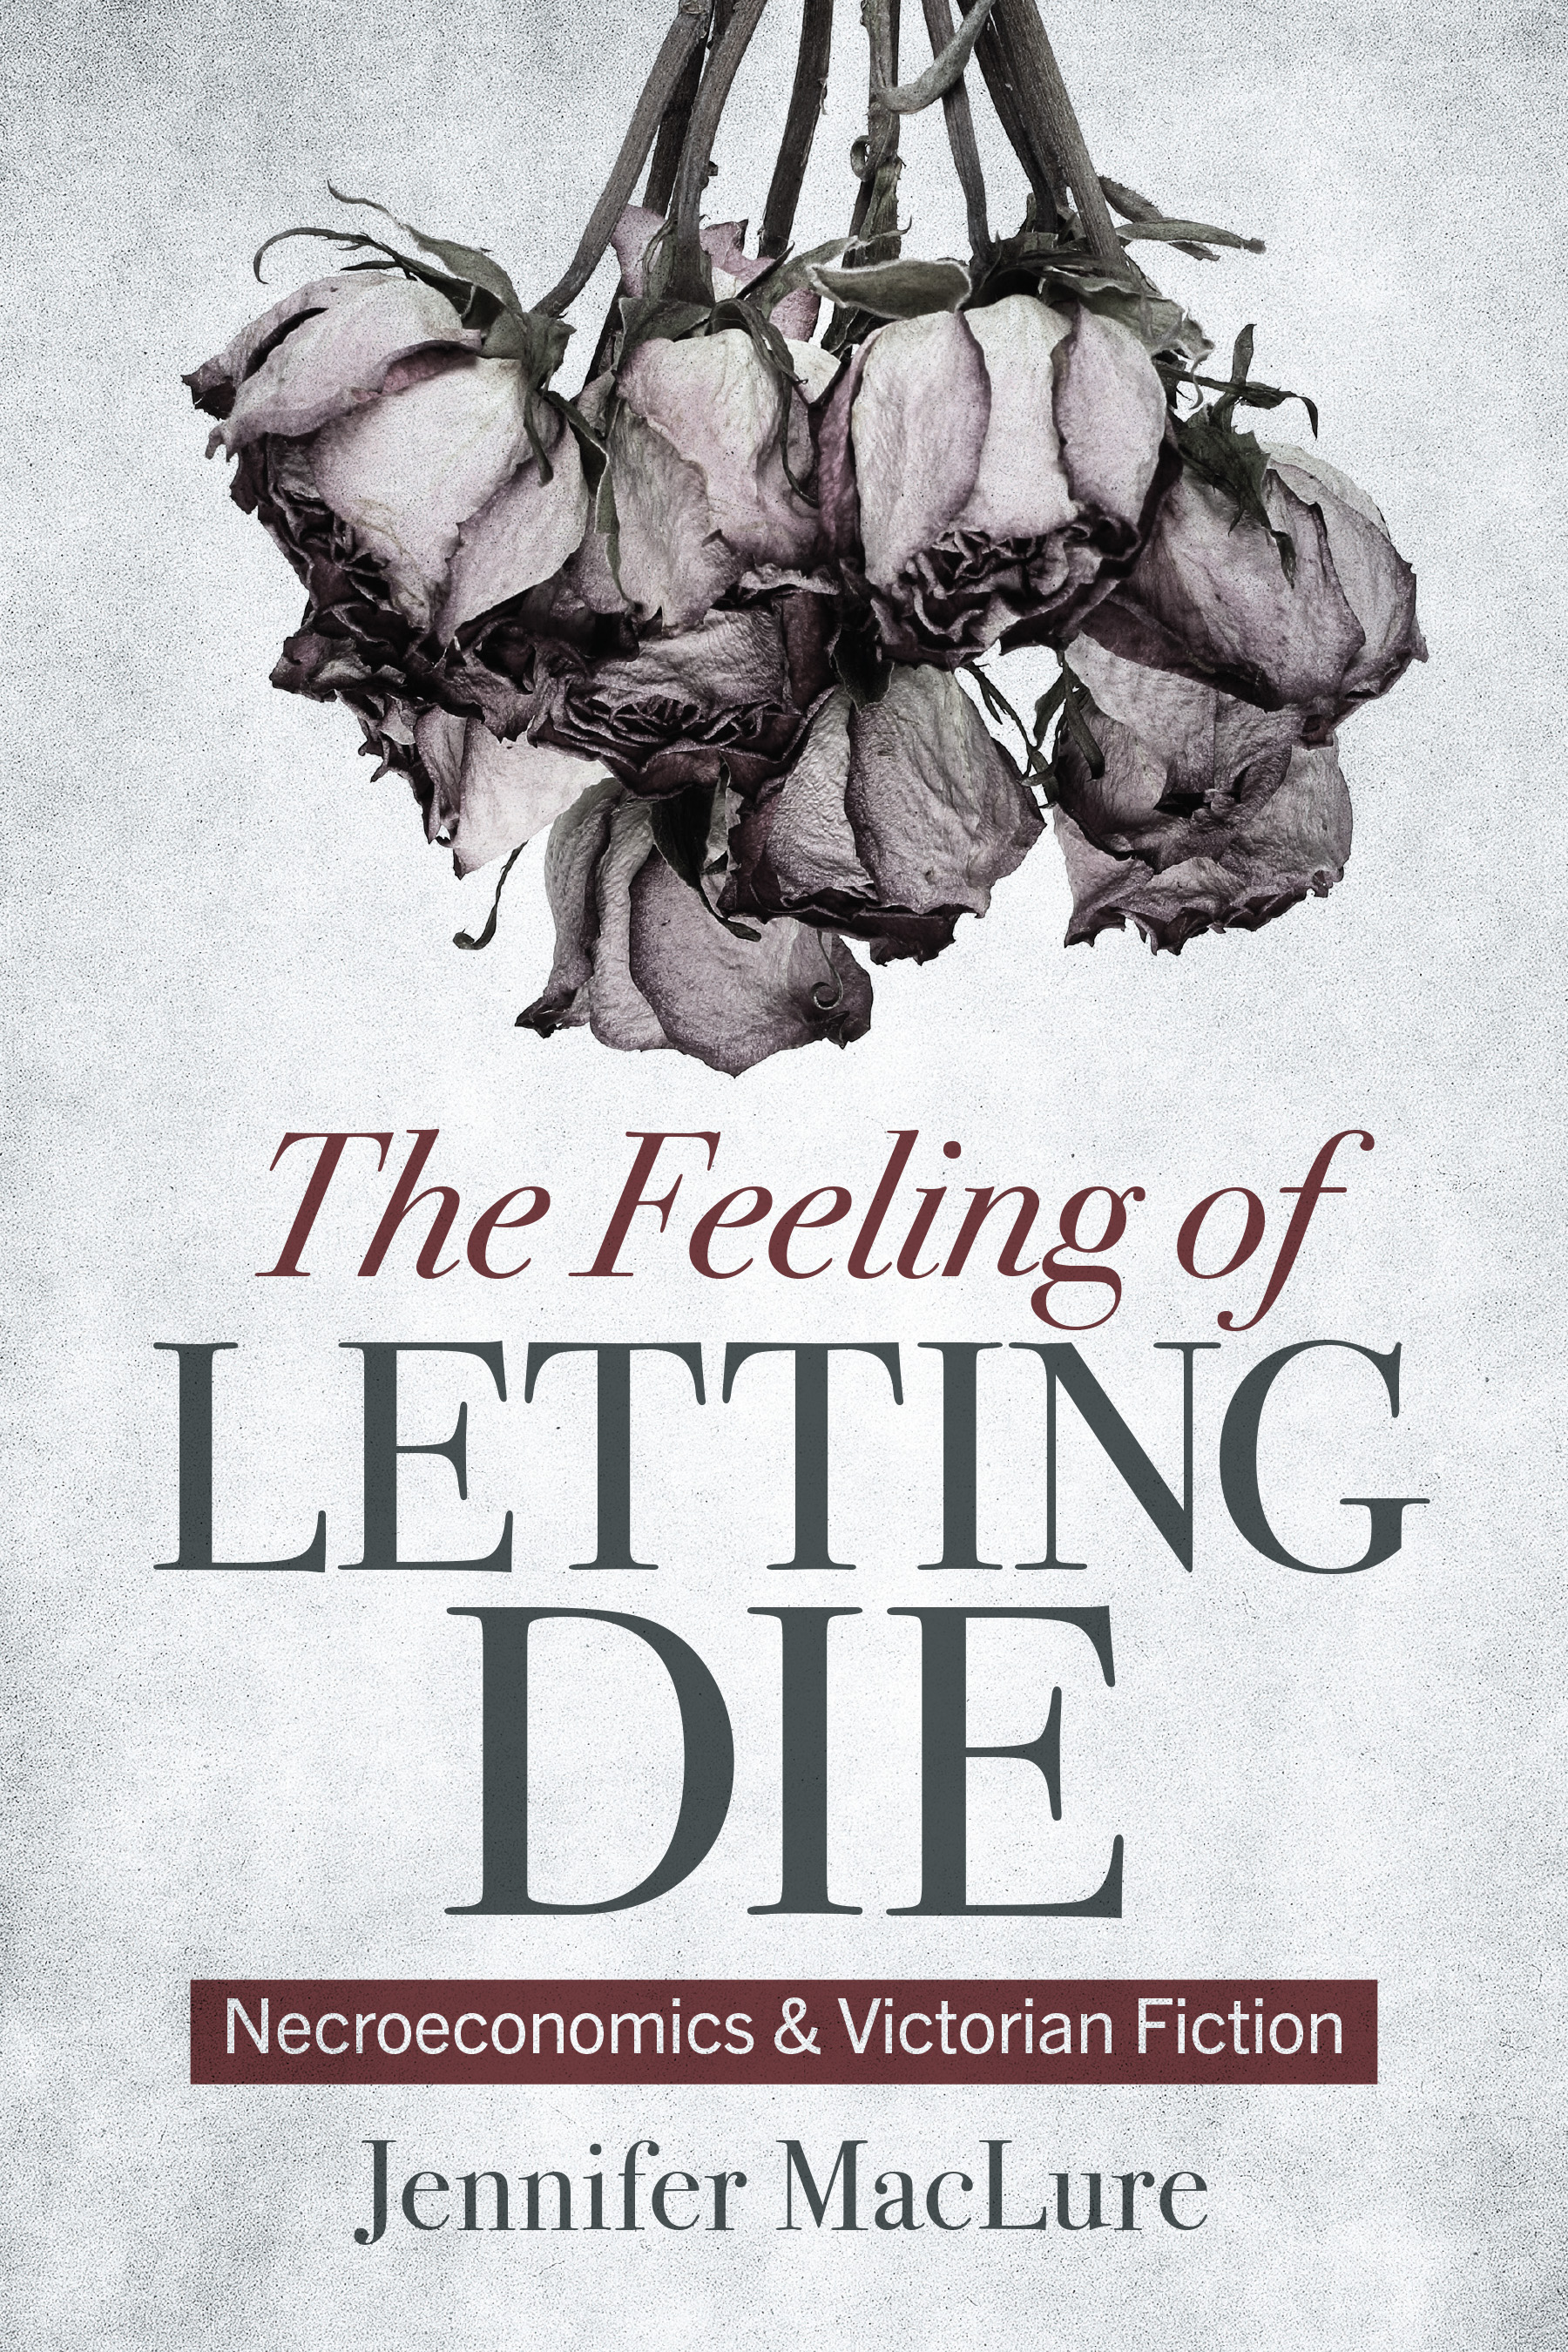 The Feeling of Letting Die: Necroeconomics and Victorian Fiction by Jennifer MacLure, featuring a bouquet of dead roses hanging upside down above the book's title.